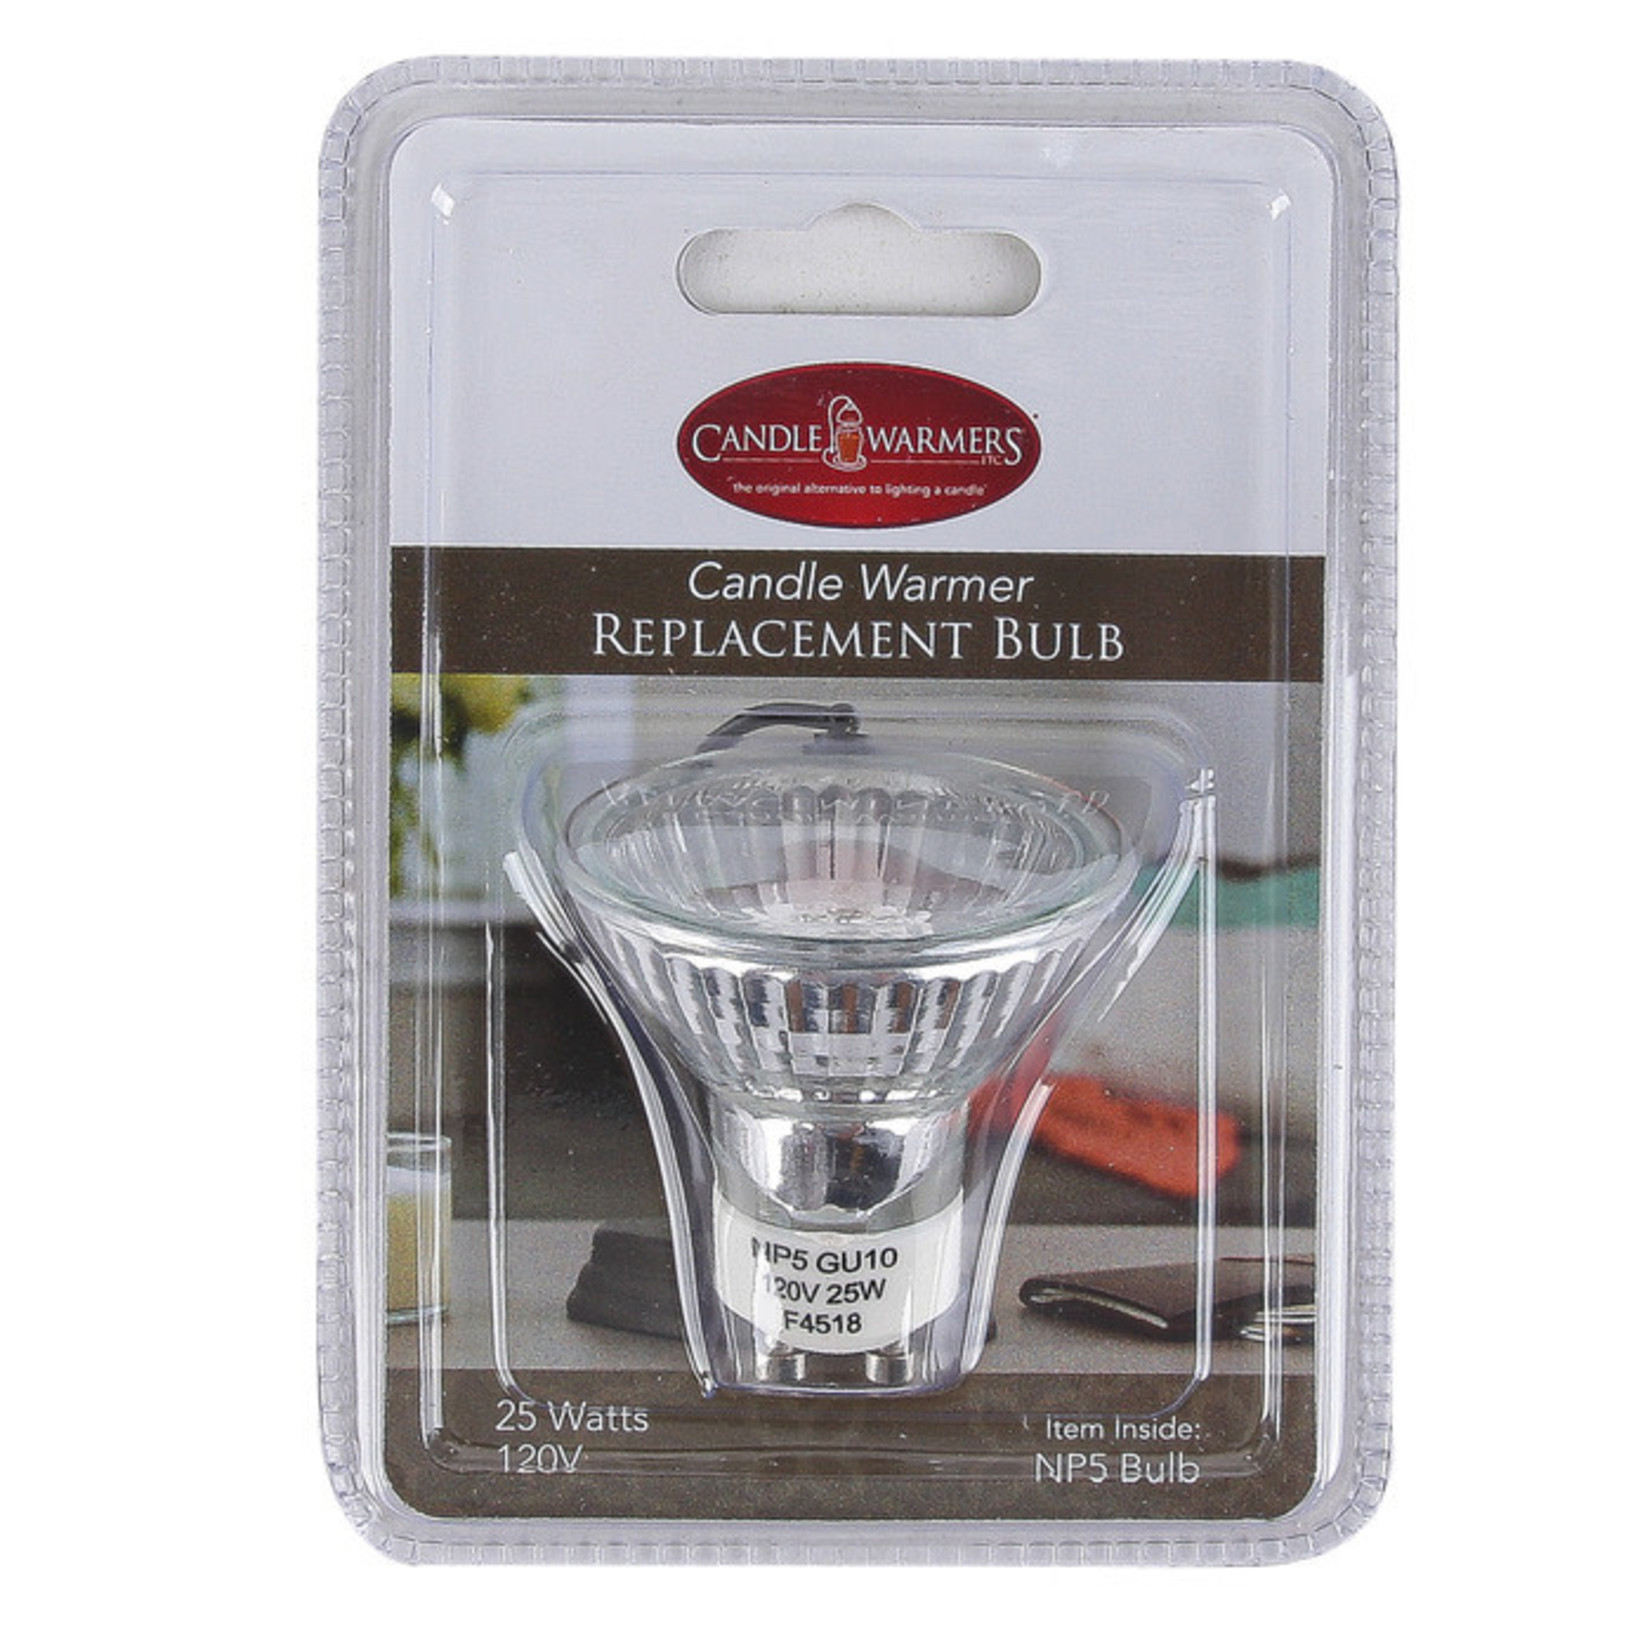 Candle Warmers Candle Warmer Replacement Bulb